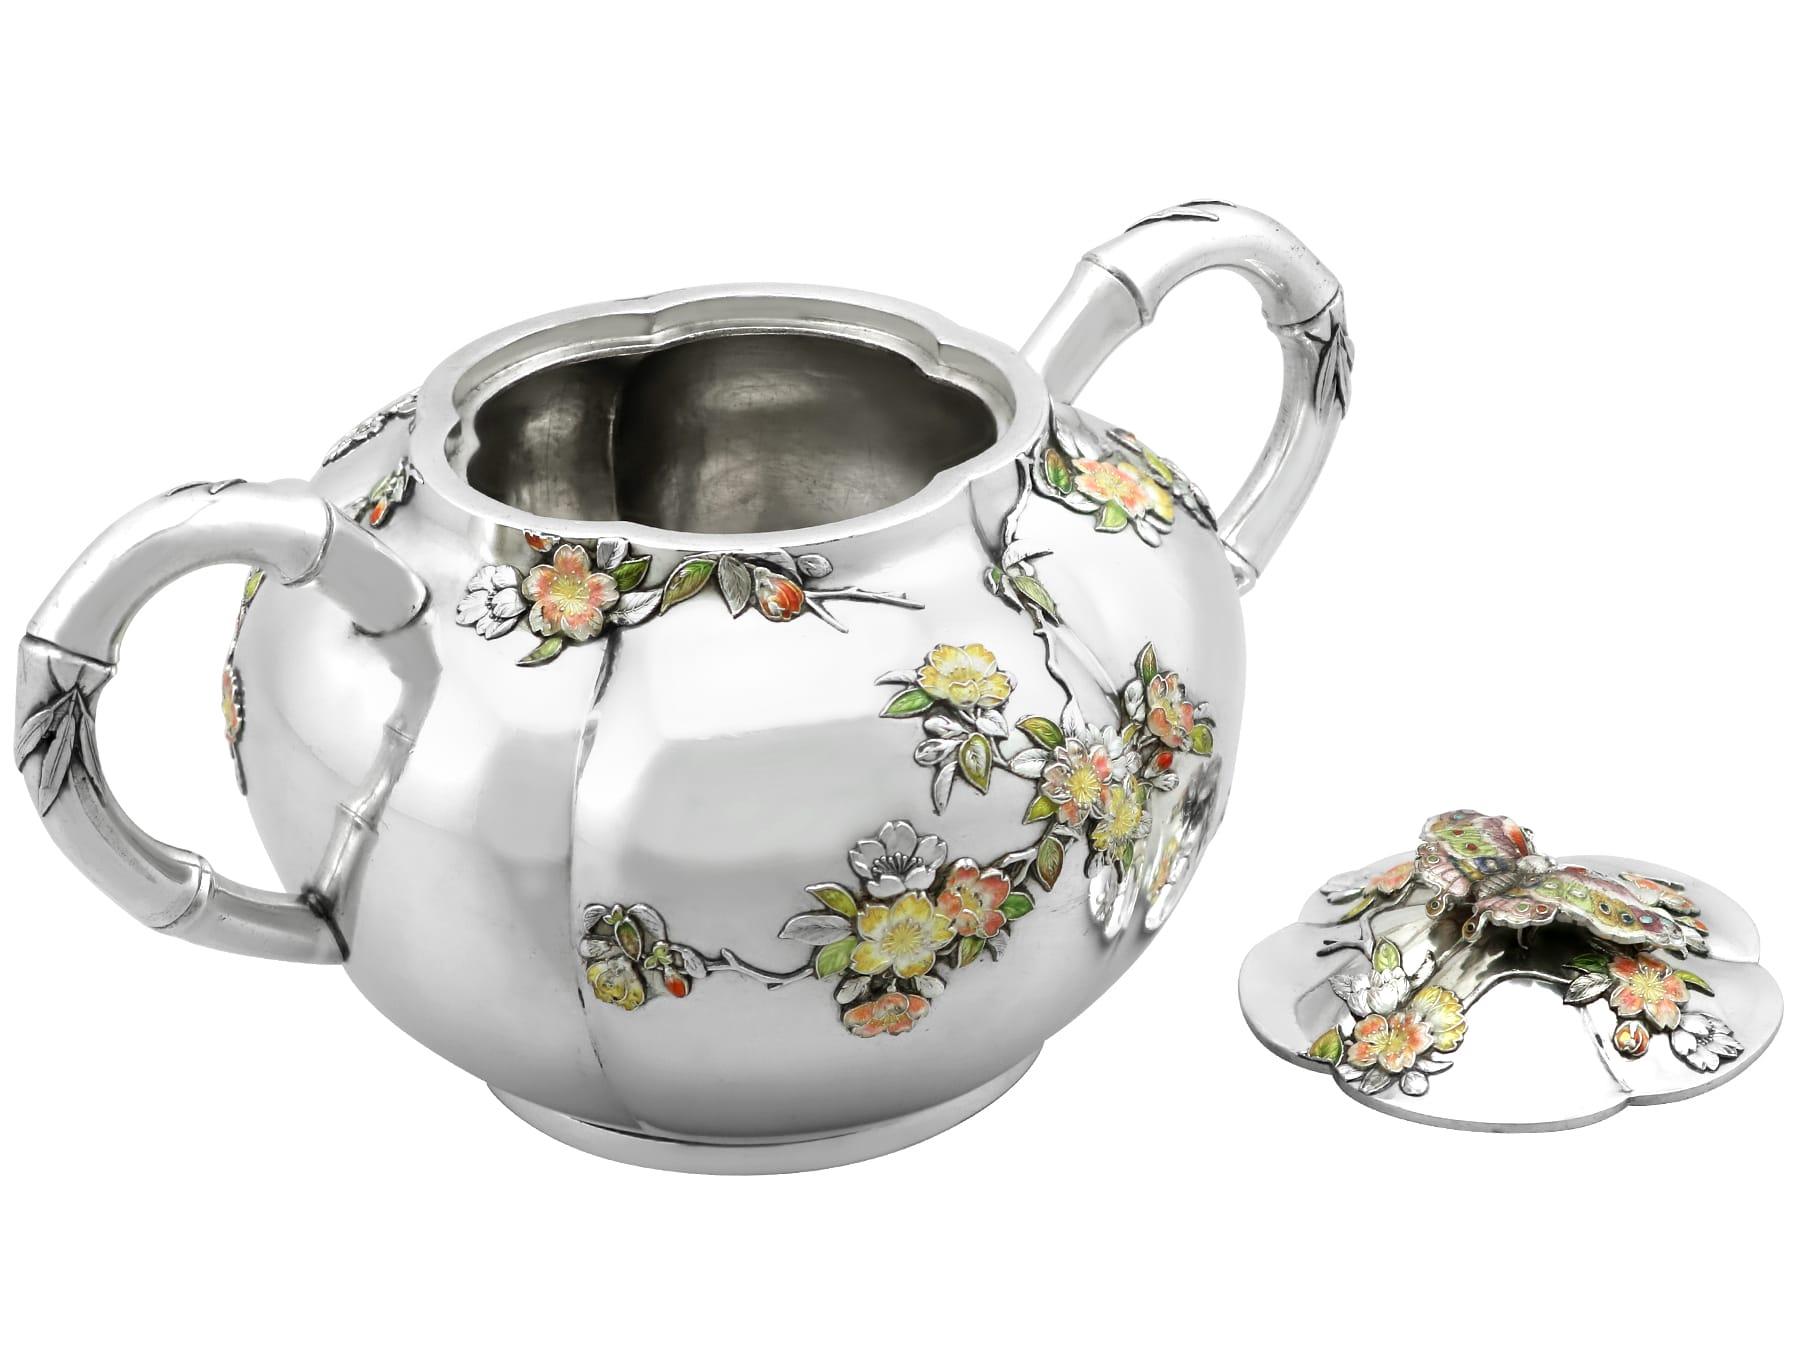 Antique Japanese Silver and Enamel Cream Jug and Sugar Bowl Circa 1890 For Sale 1